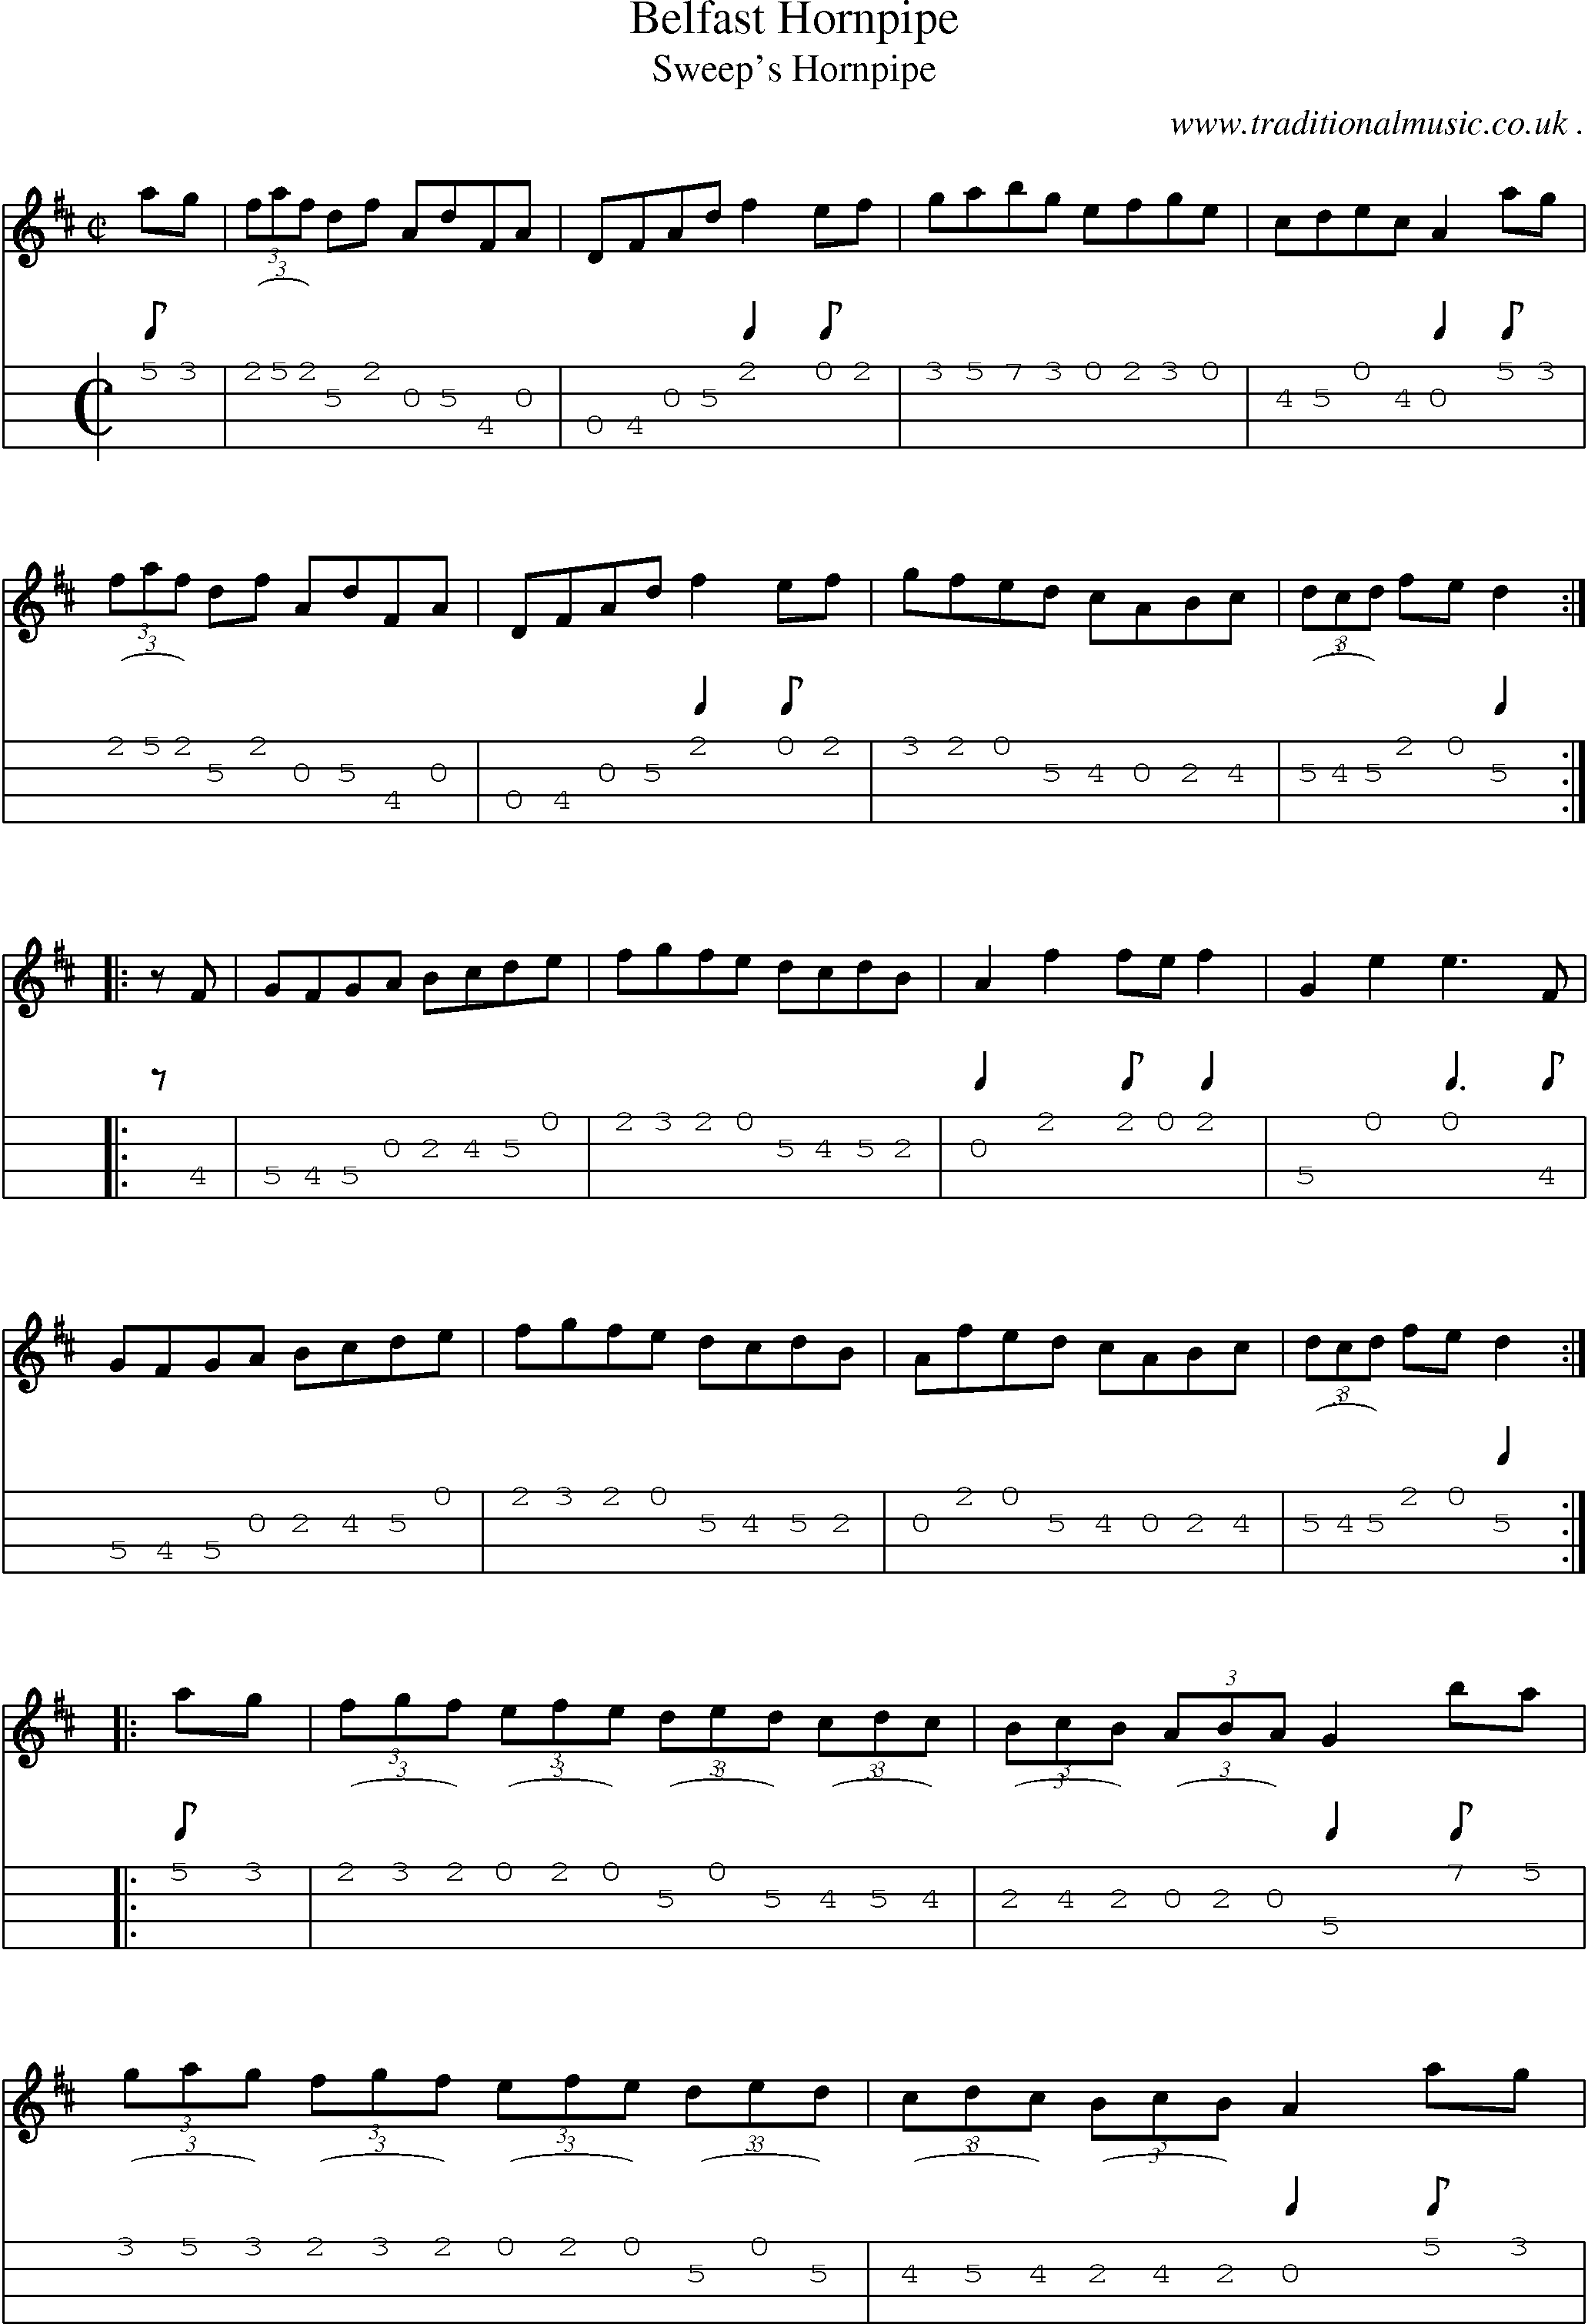 Sheet-Music and Mandolin Tabs for Belfast Hornpipe